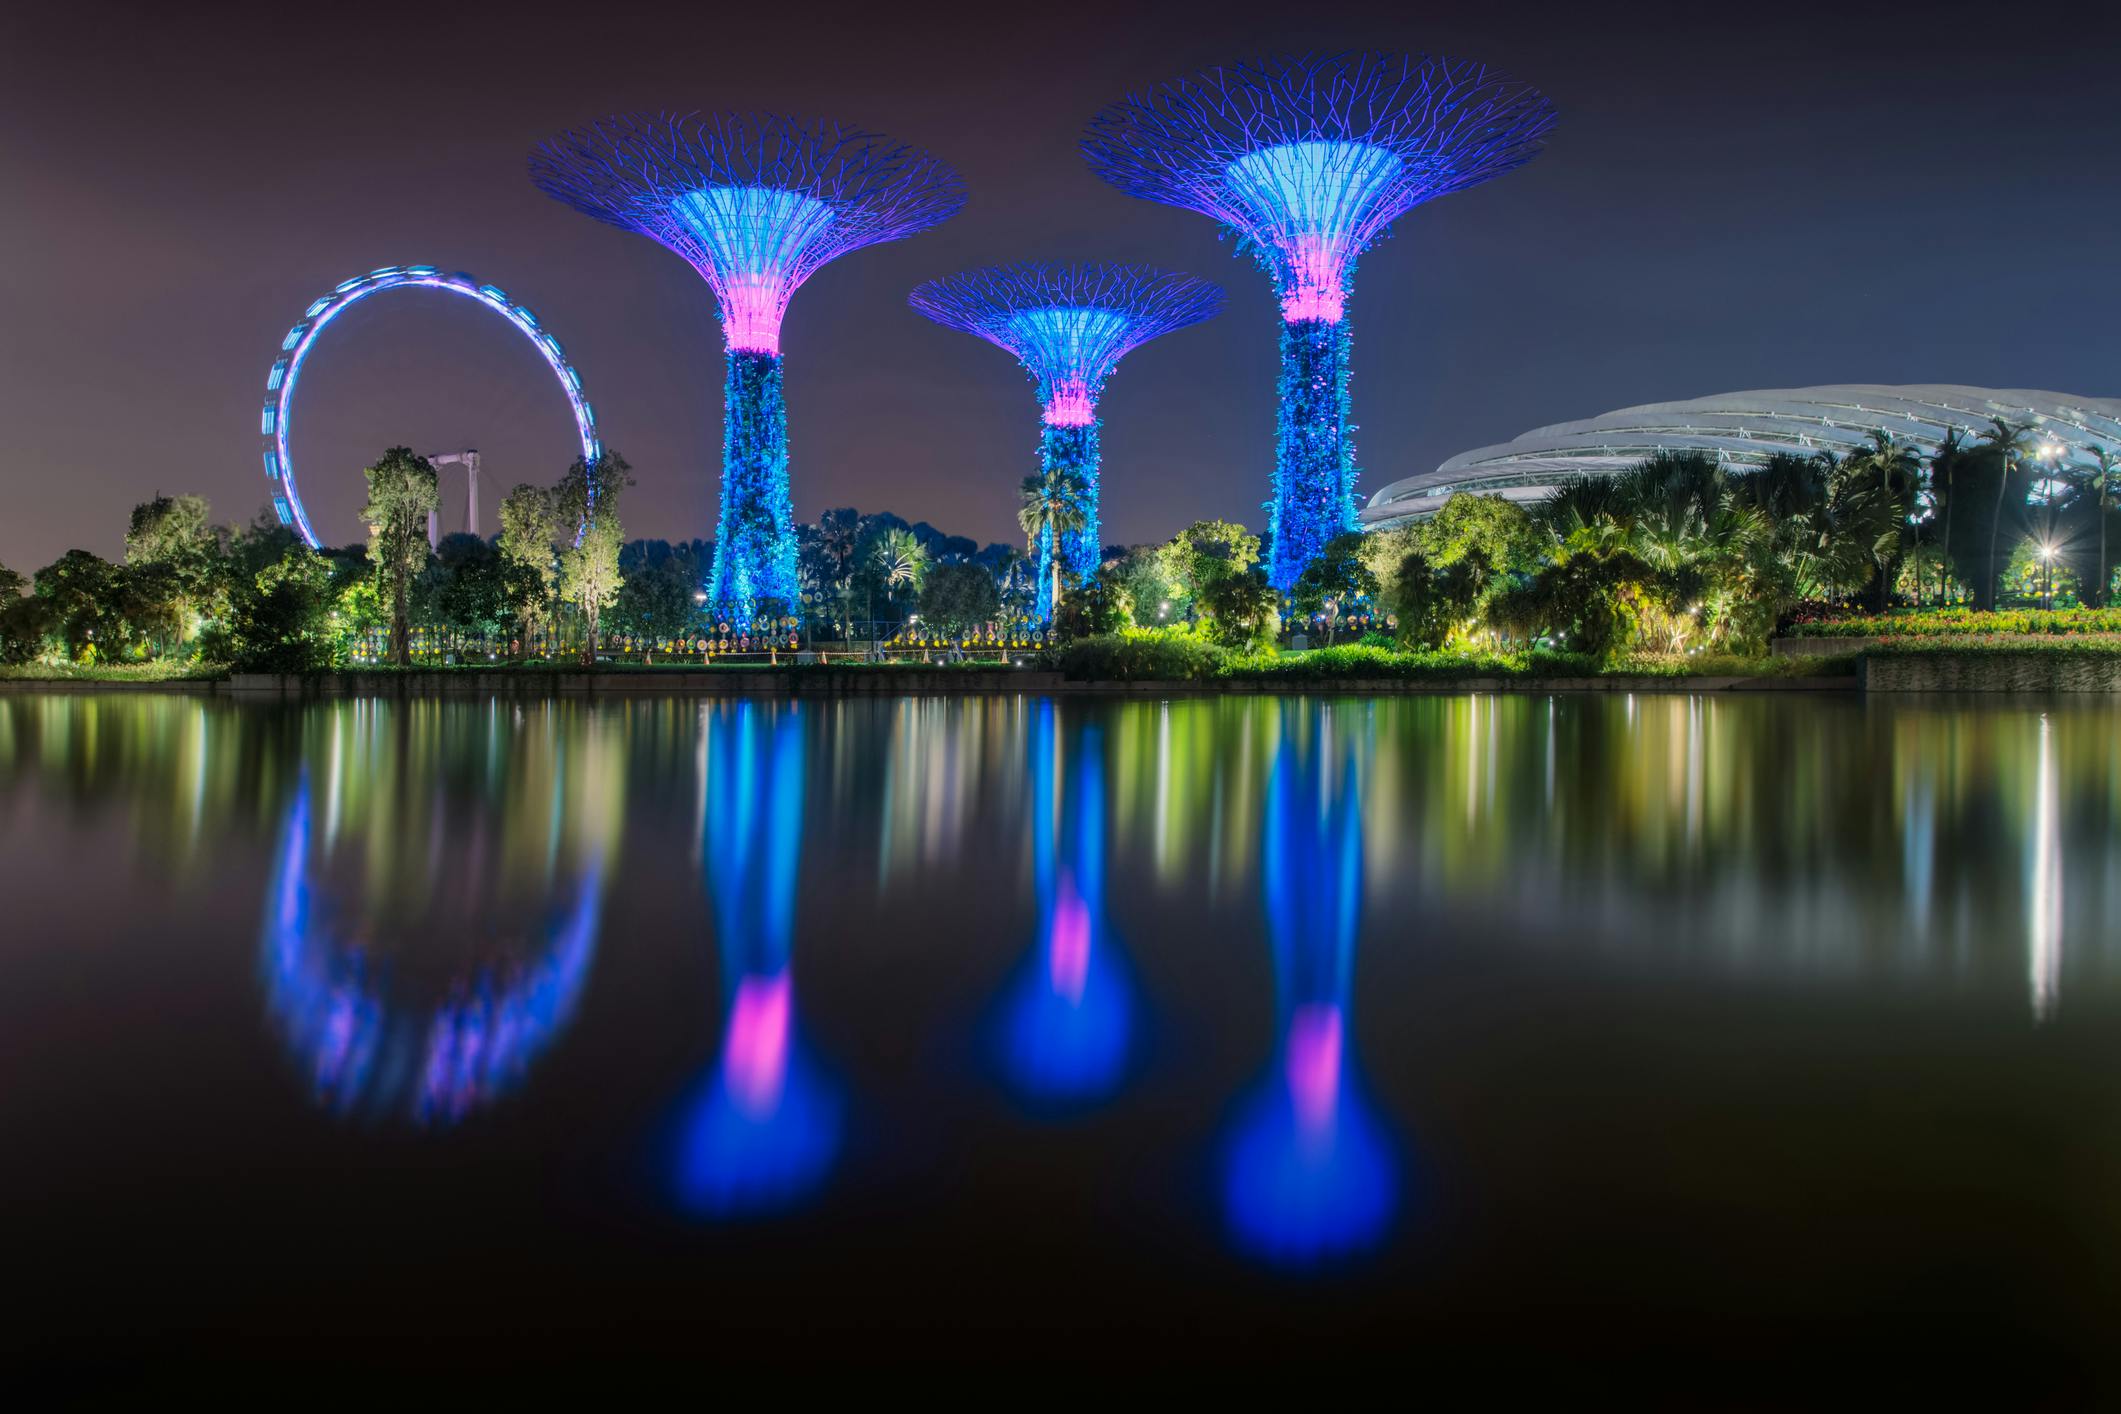 Singapore Flyer, Gardens by the Bay, and Esplanade Theatres Night View